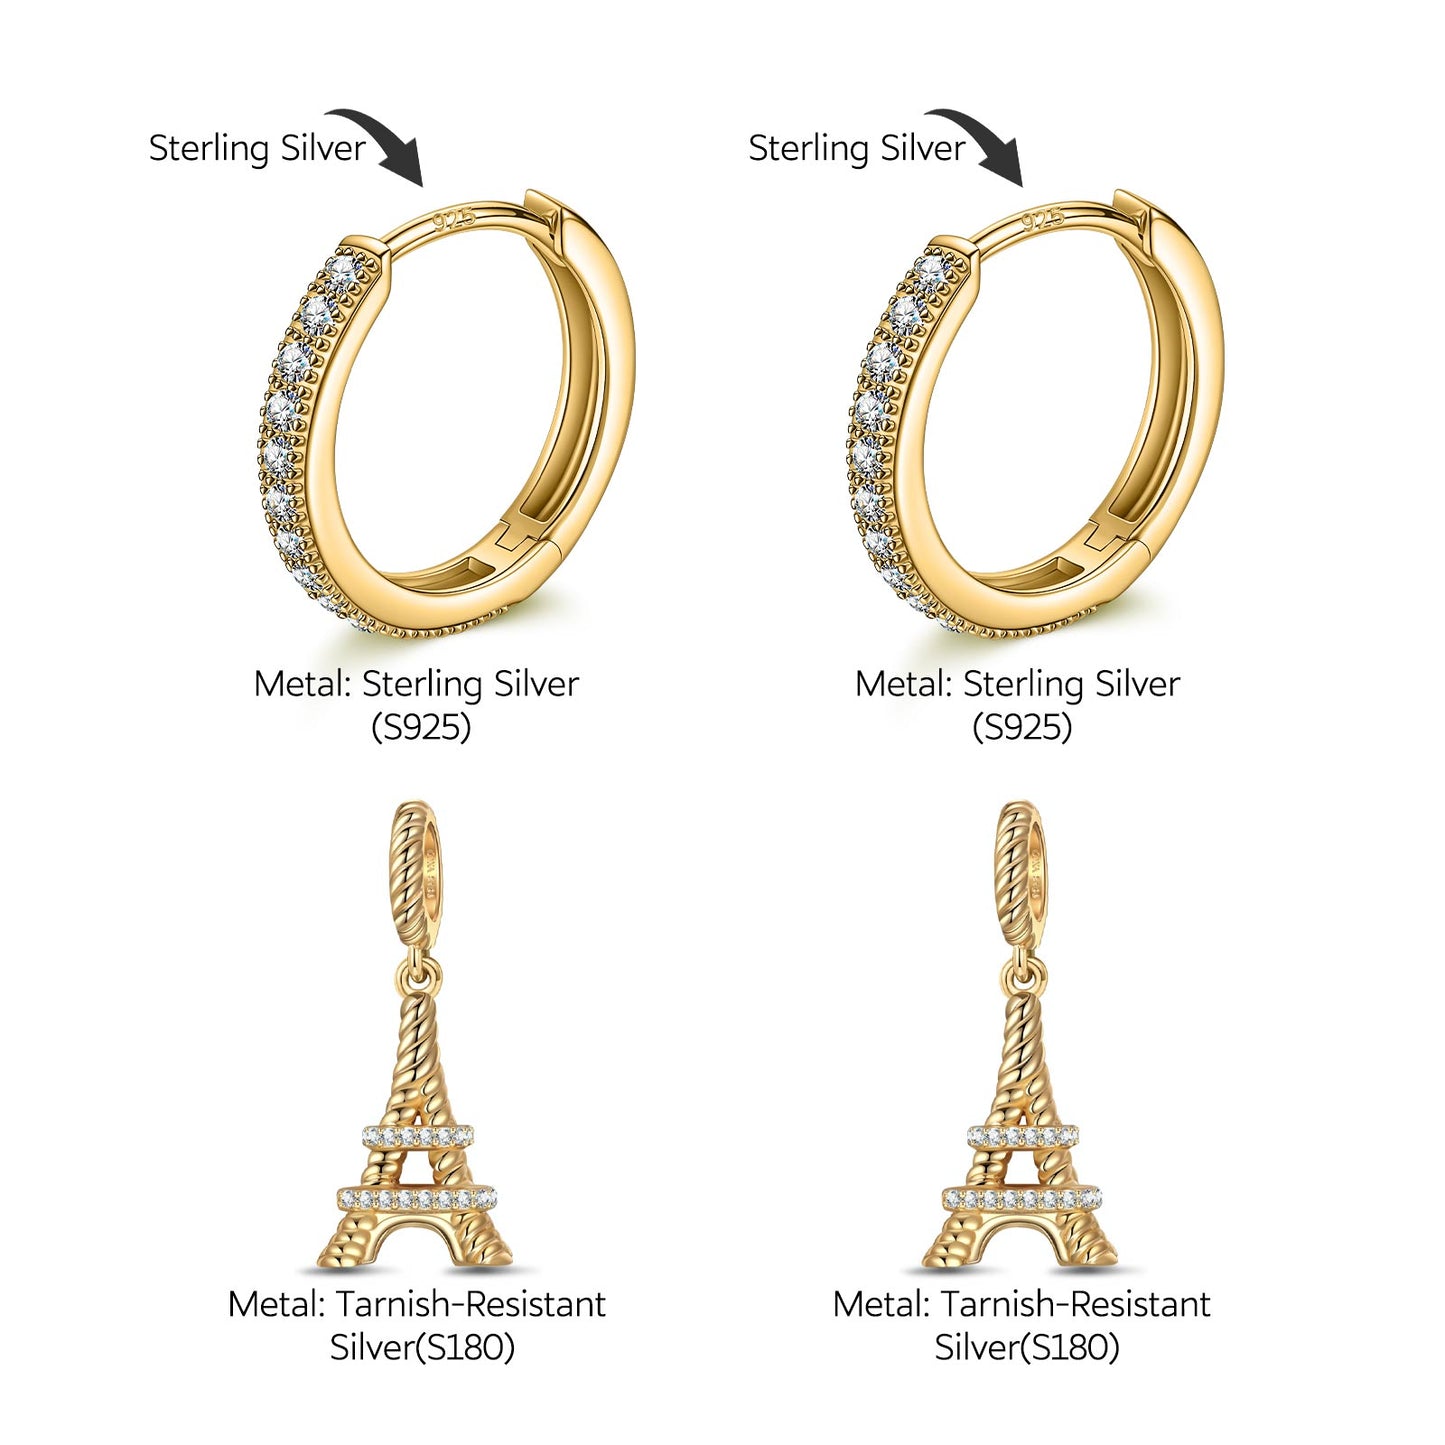 Sterling Silver Vitality of Paris Charms Earrings Set In 14K Gold Plated